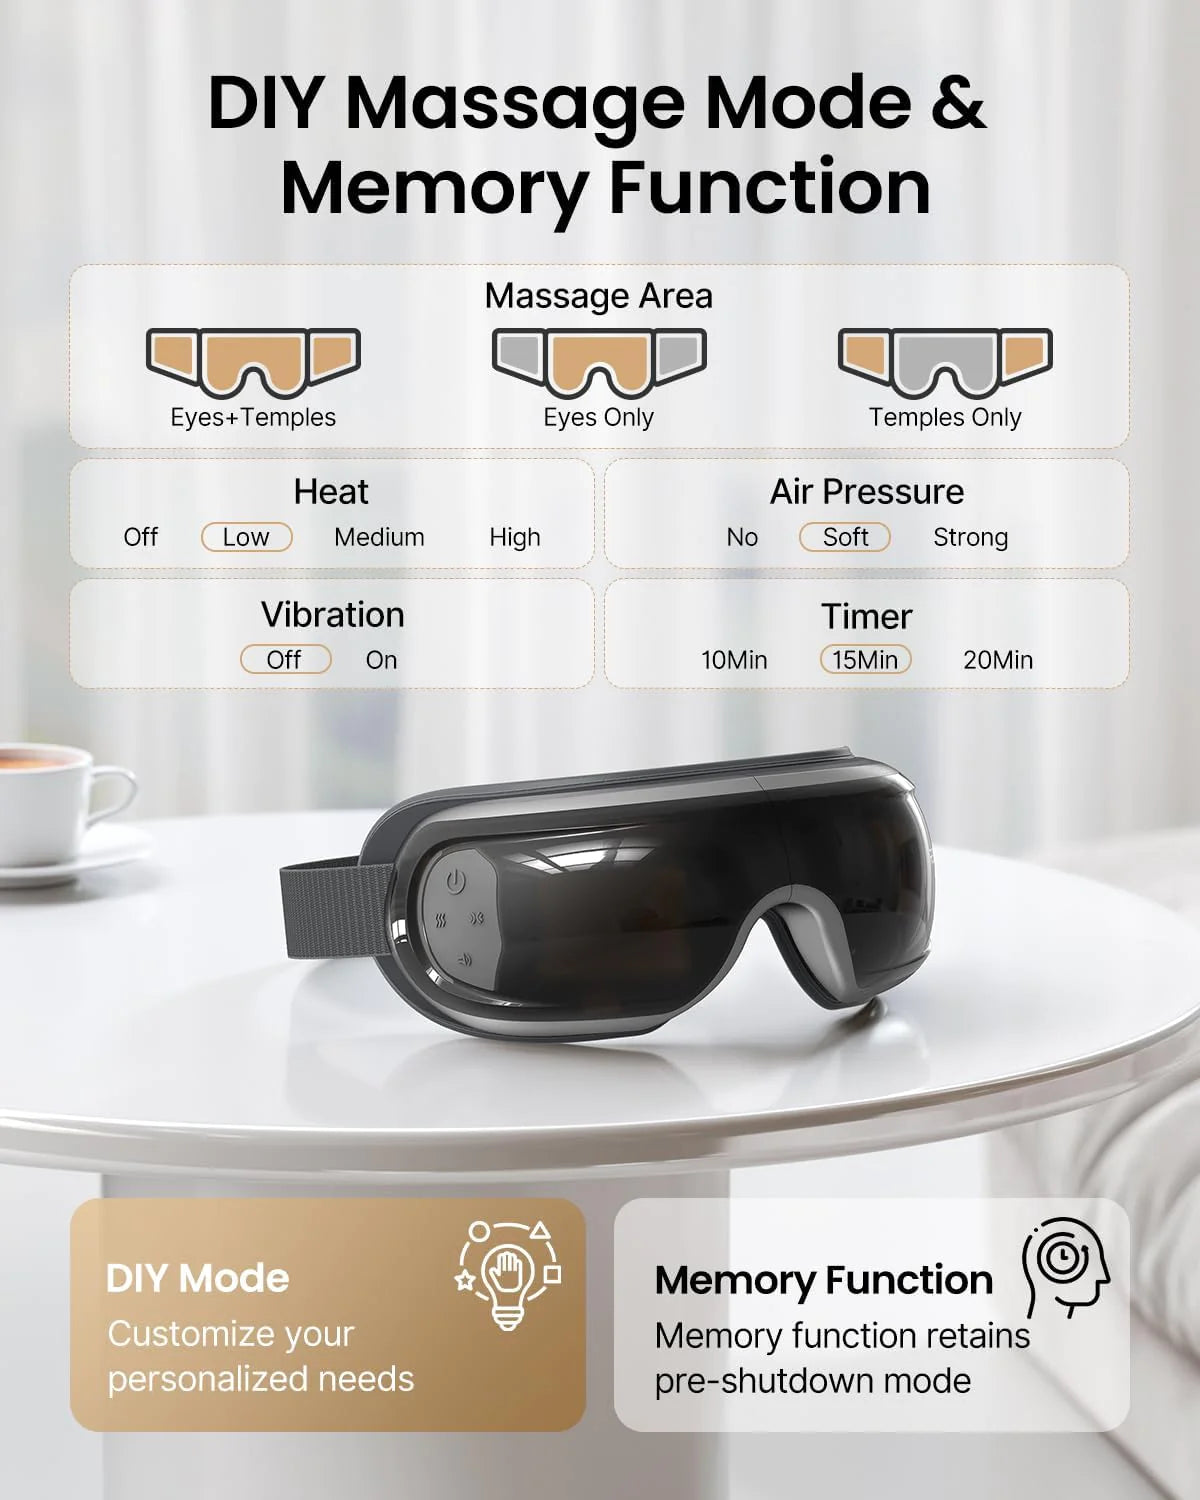 A Renpho EU Eyeris 3 Eye Massager is displayed on a white table. Above it, text describes settings like massage area options (eyes+temples, eyes only), heat levels (off, low, medium, high), air pressure (soft, strong), vibration (on/off), and timer options. Highlights include DIY mode and memory function for personalized eye care. A cup and saucer are in the background.